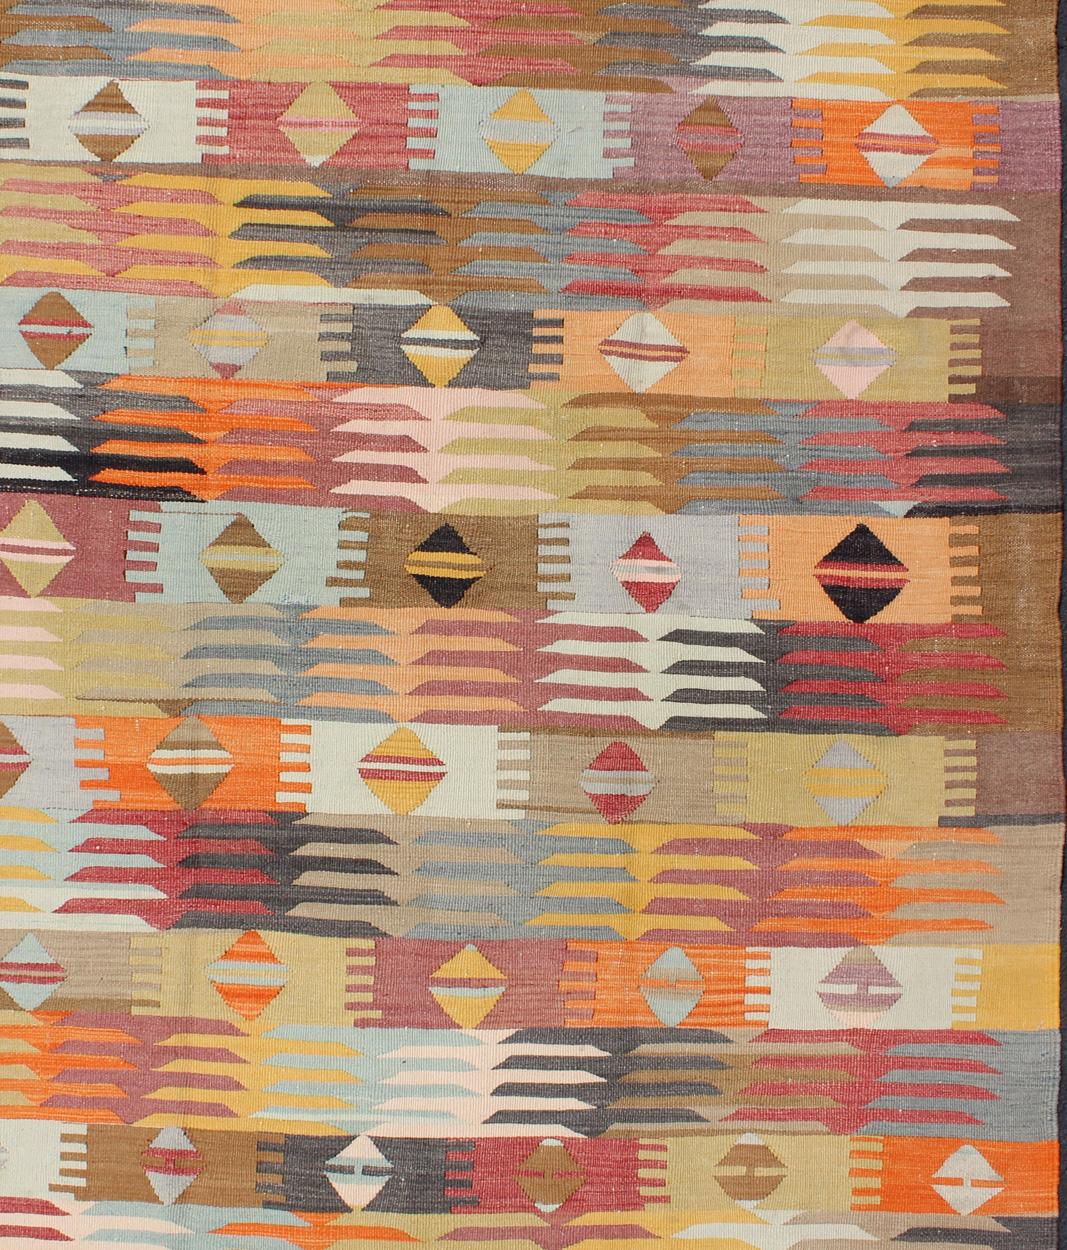 Vintage Turkish Kilim rug with all-over geometric shapes, rug TU-NED-29, country of origin / type: Turkey / Kilim, circa mid-20th century

This gorgeous and unique midcentury Turkish vintage Kilim showcases an array of beautiful colors, including